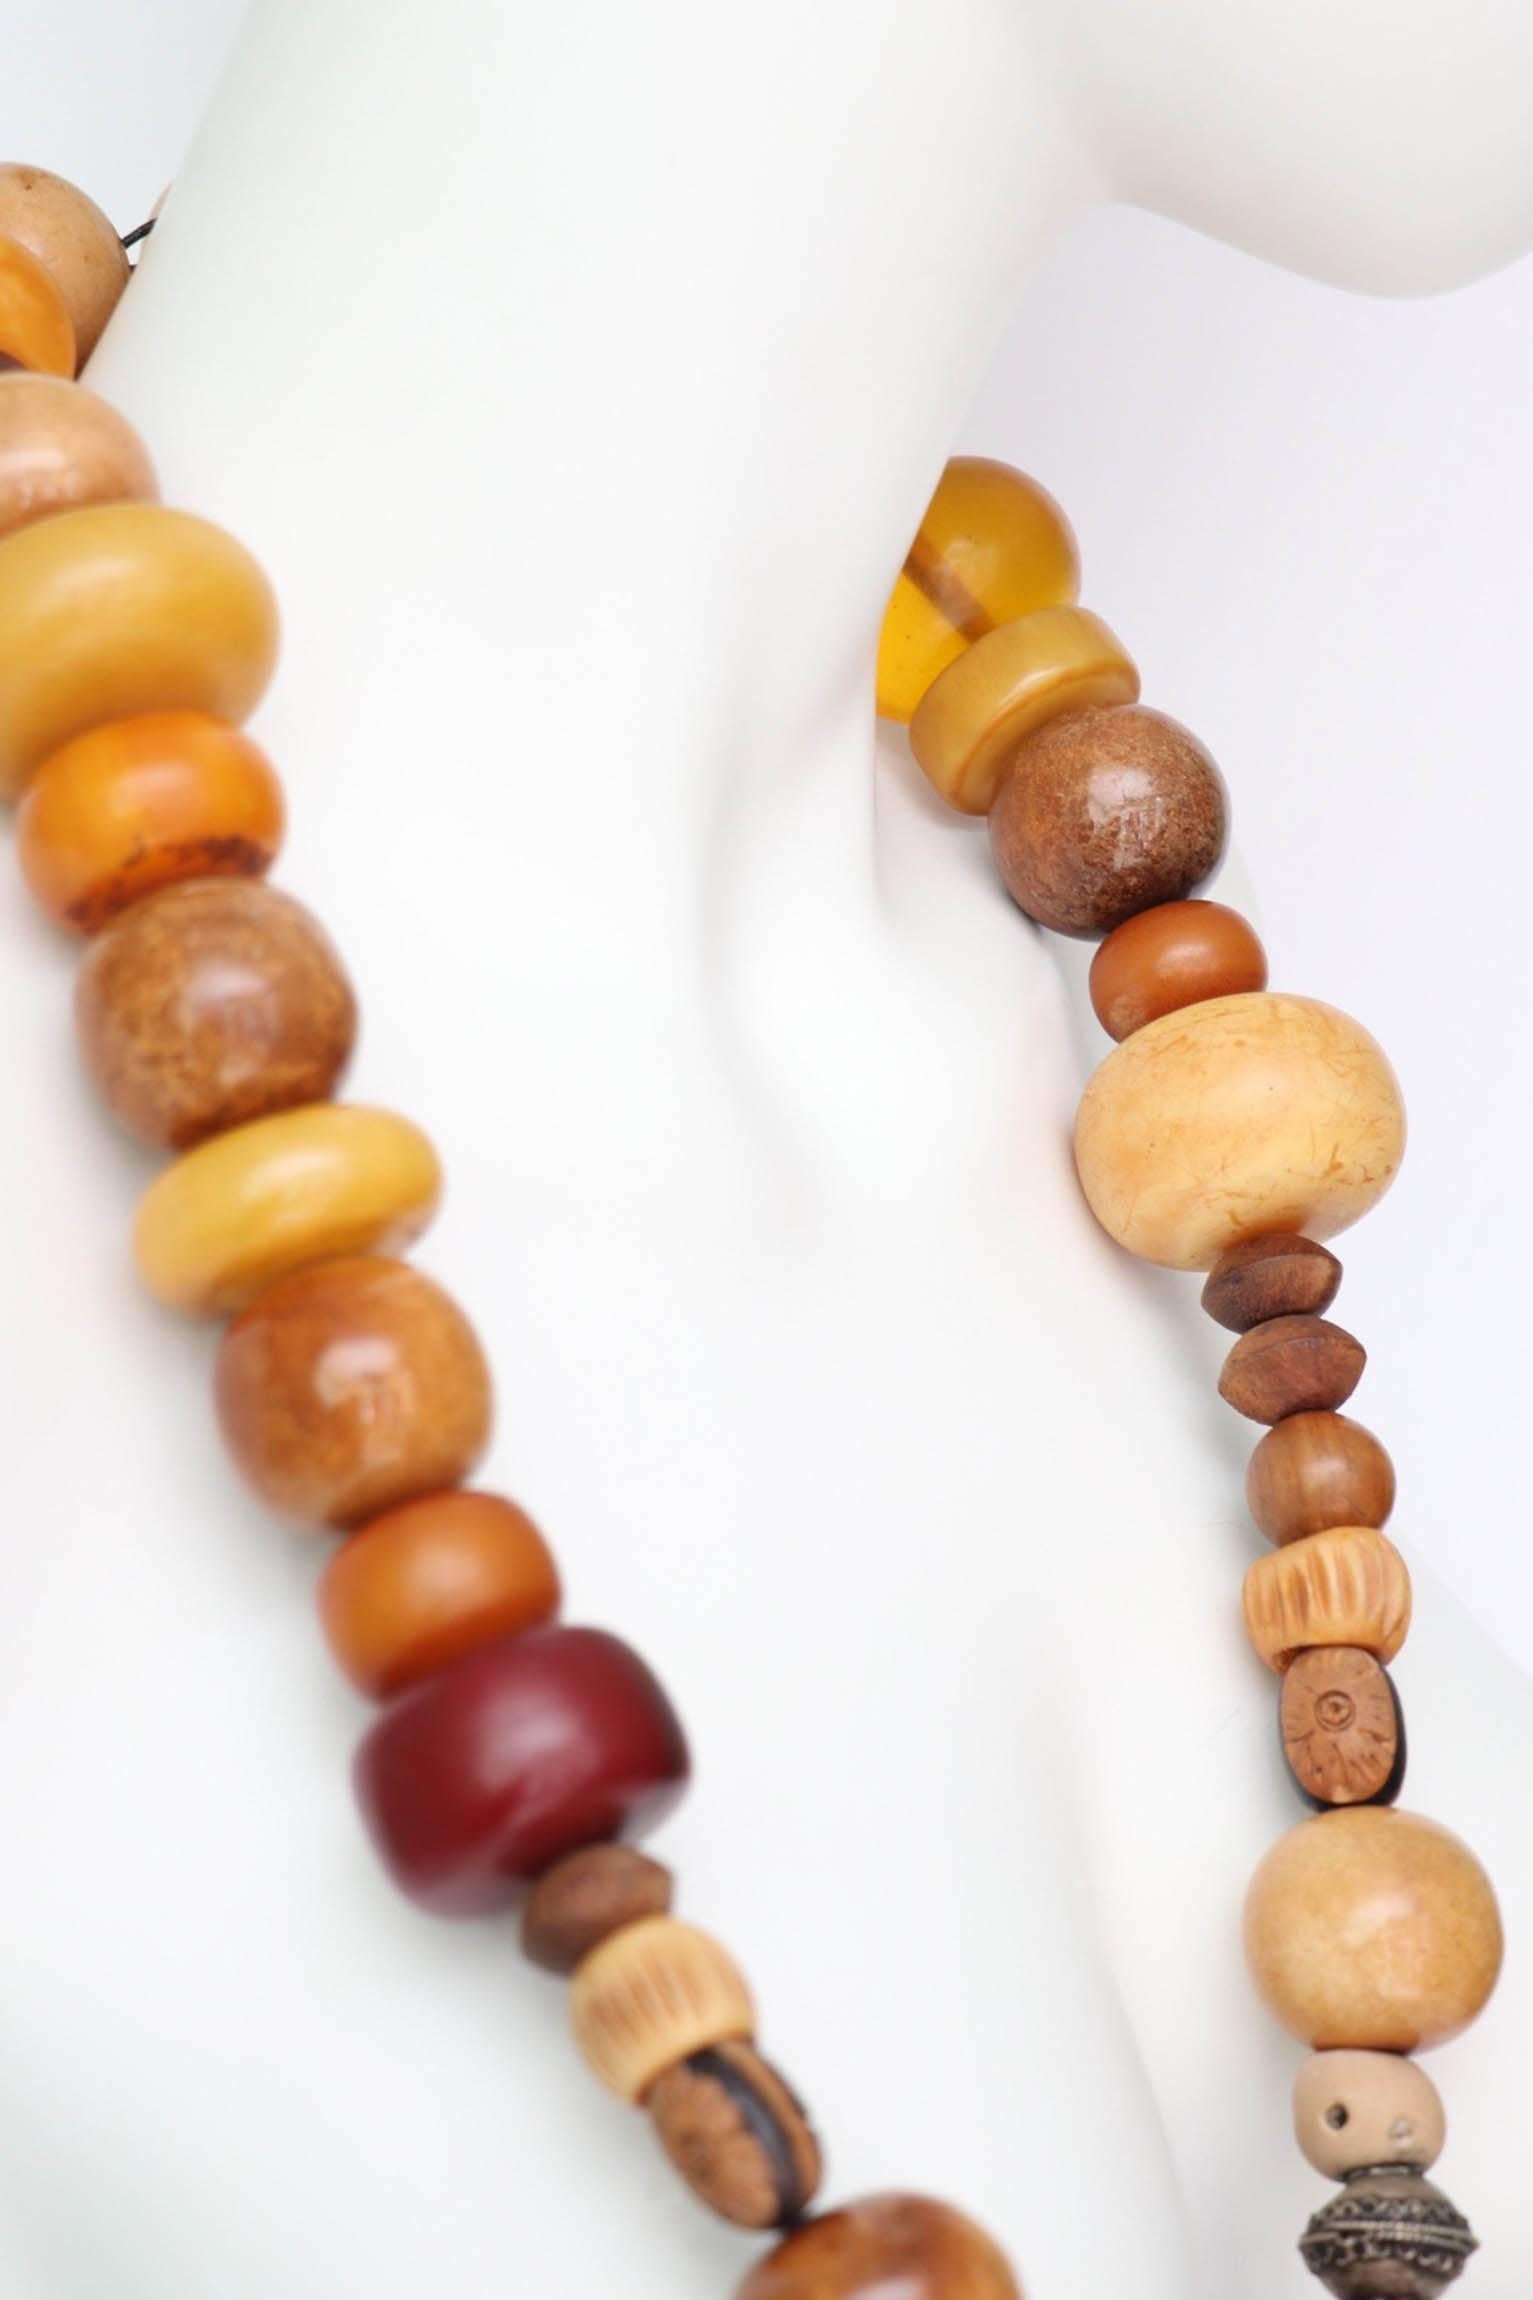 A stunning 1970s heavily beaded necklace consisting of several large beads of both amber and wood. The beads have different shapes, sizes and various colours. 
The necklace is set on an elastic string and is tied at the back. 